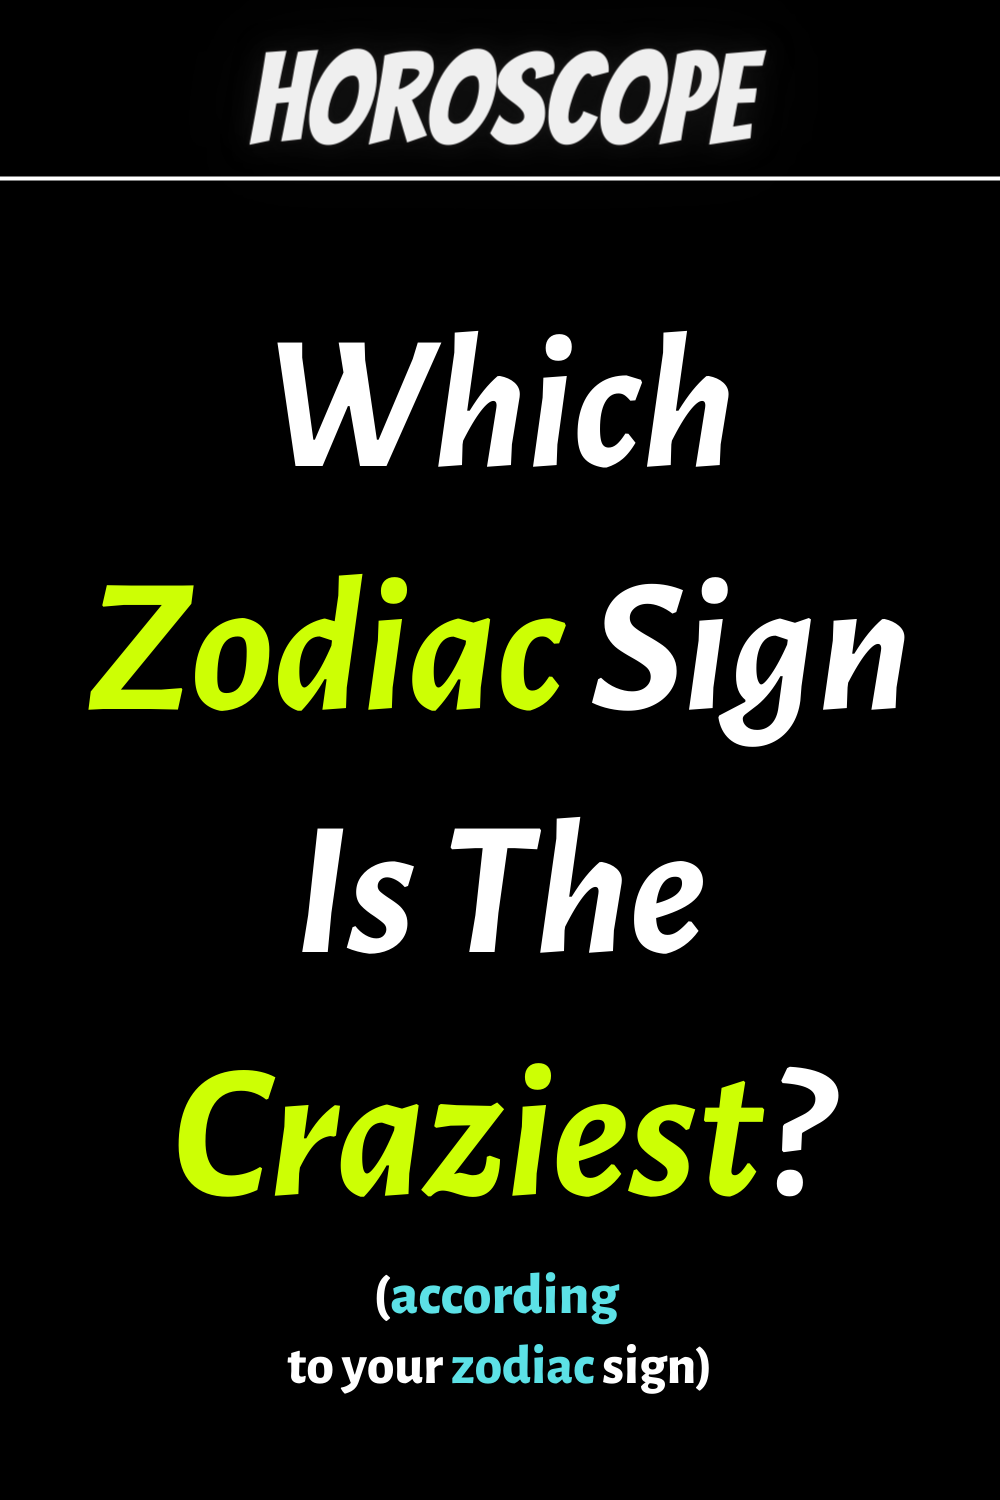 Which Zodiac Sign Is The Craziest? Star Signs Ranked